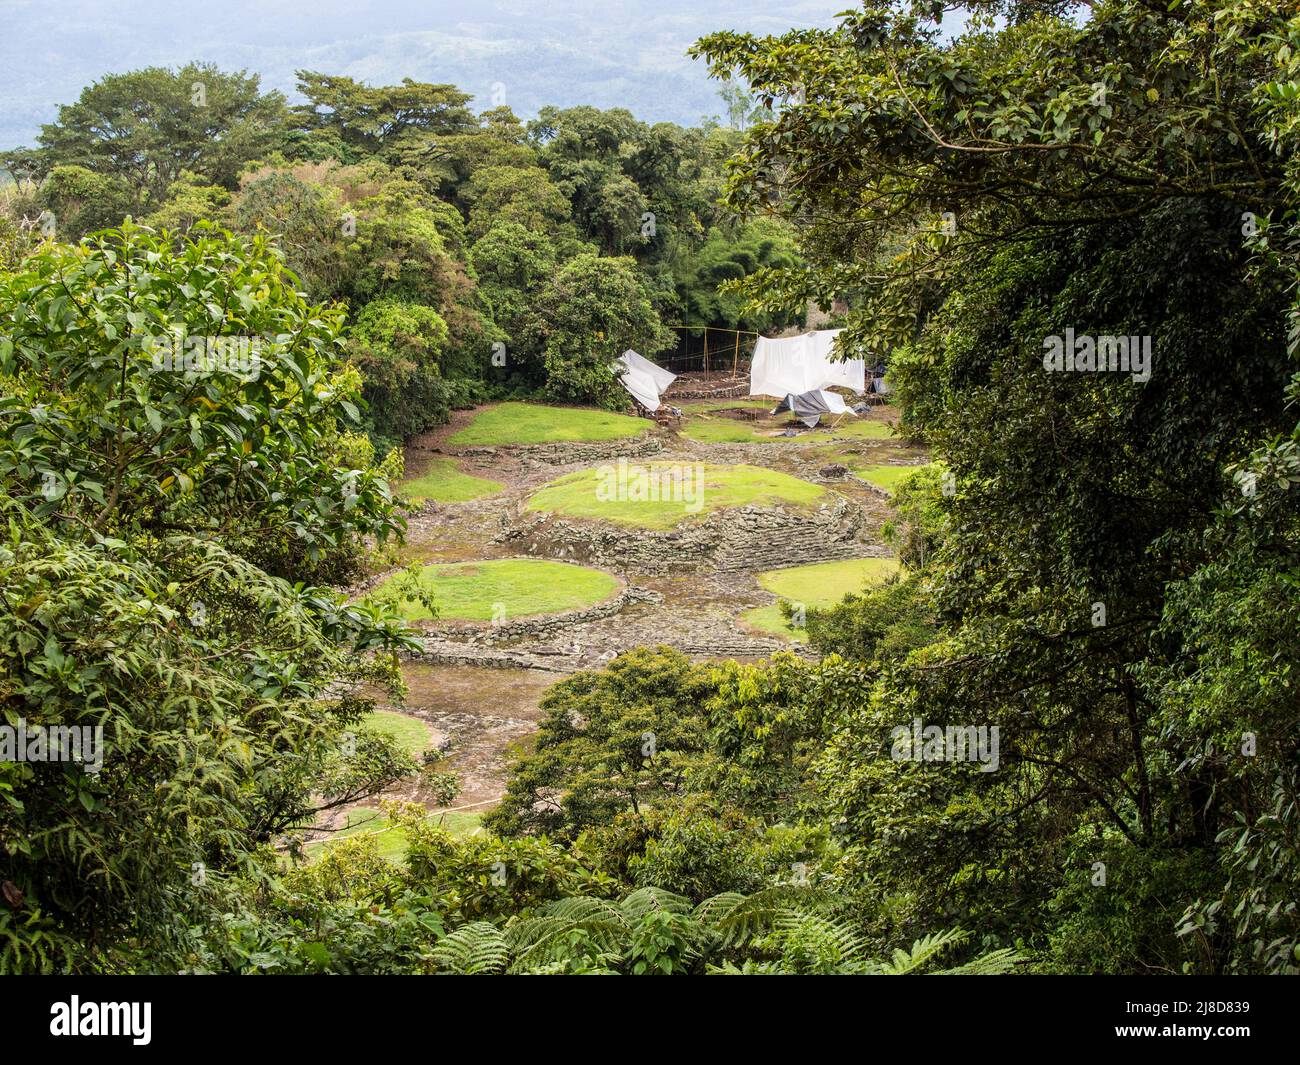 Archaeologists under white tents investigating the Pre-Columbian site of Guayabo near Turrialba, Costa Rica Stock Photo